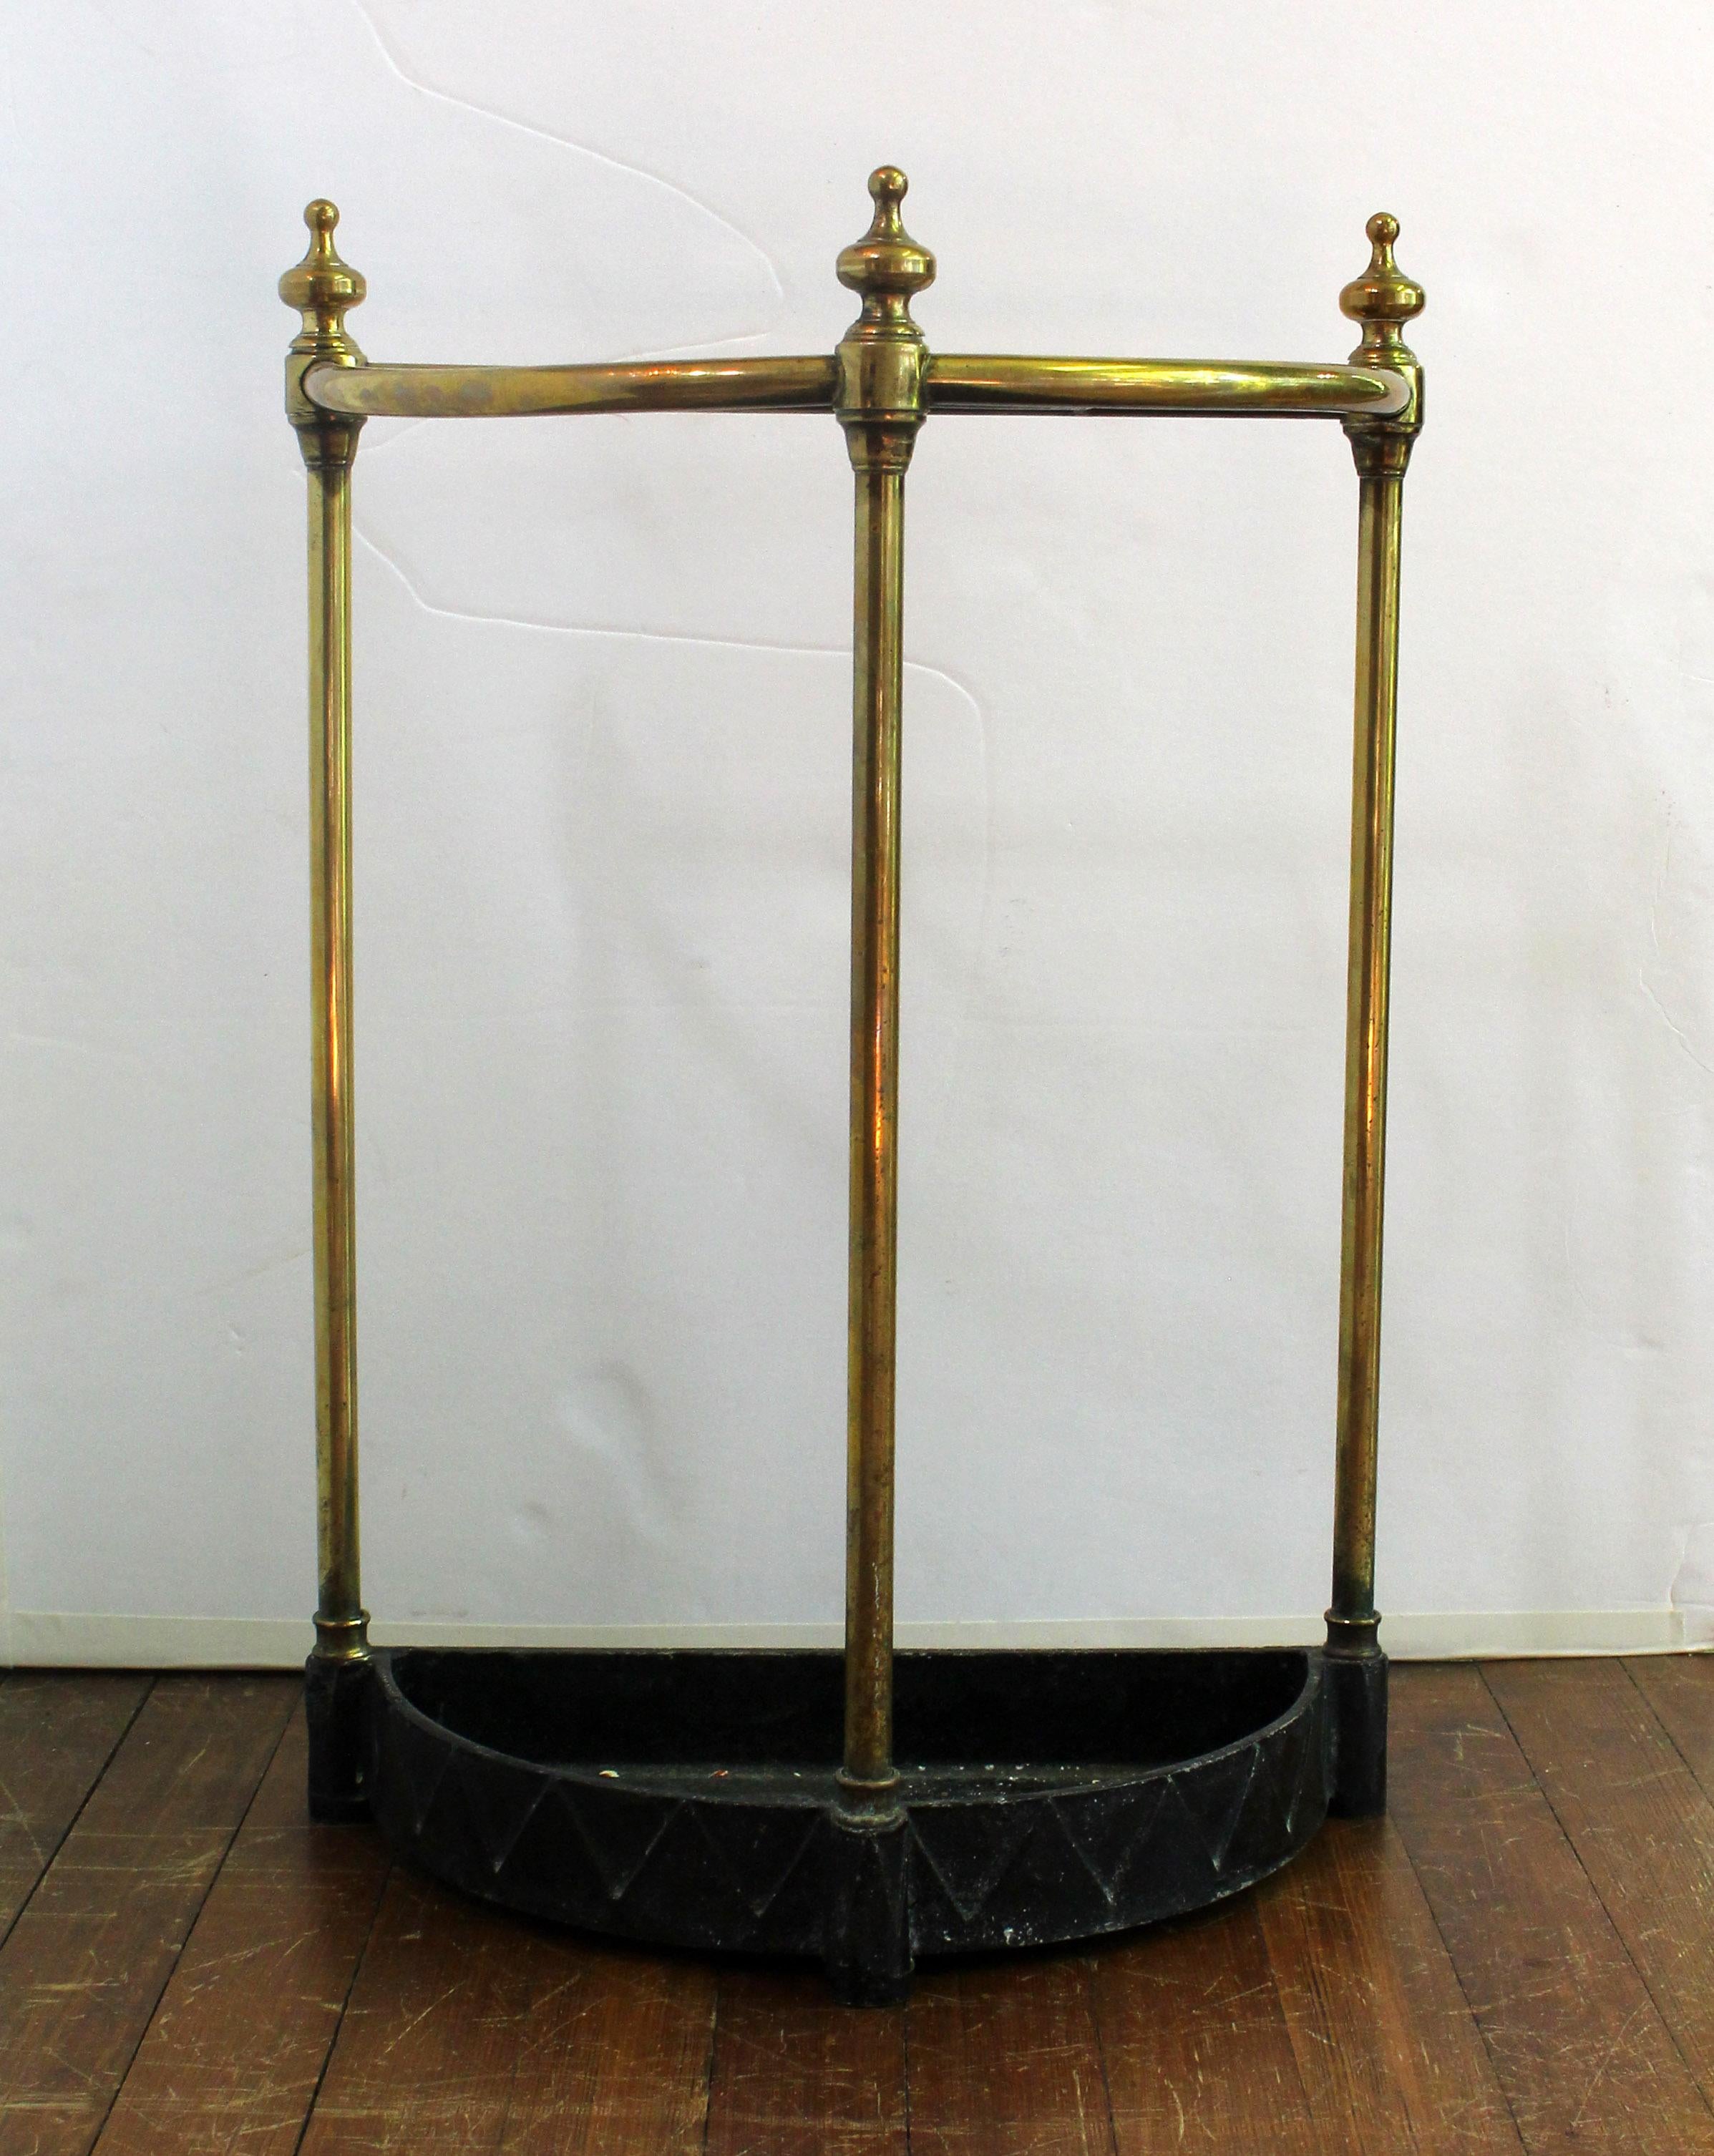 Early 20th century brass & zinc demilune form stick stand, English. Of good weight with well turned finial tips. Marked: JANS; #226, Made in England. 16